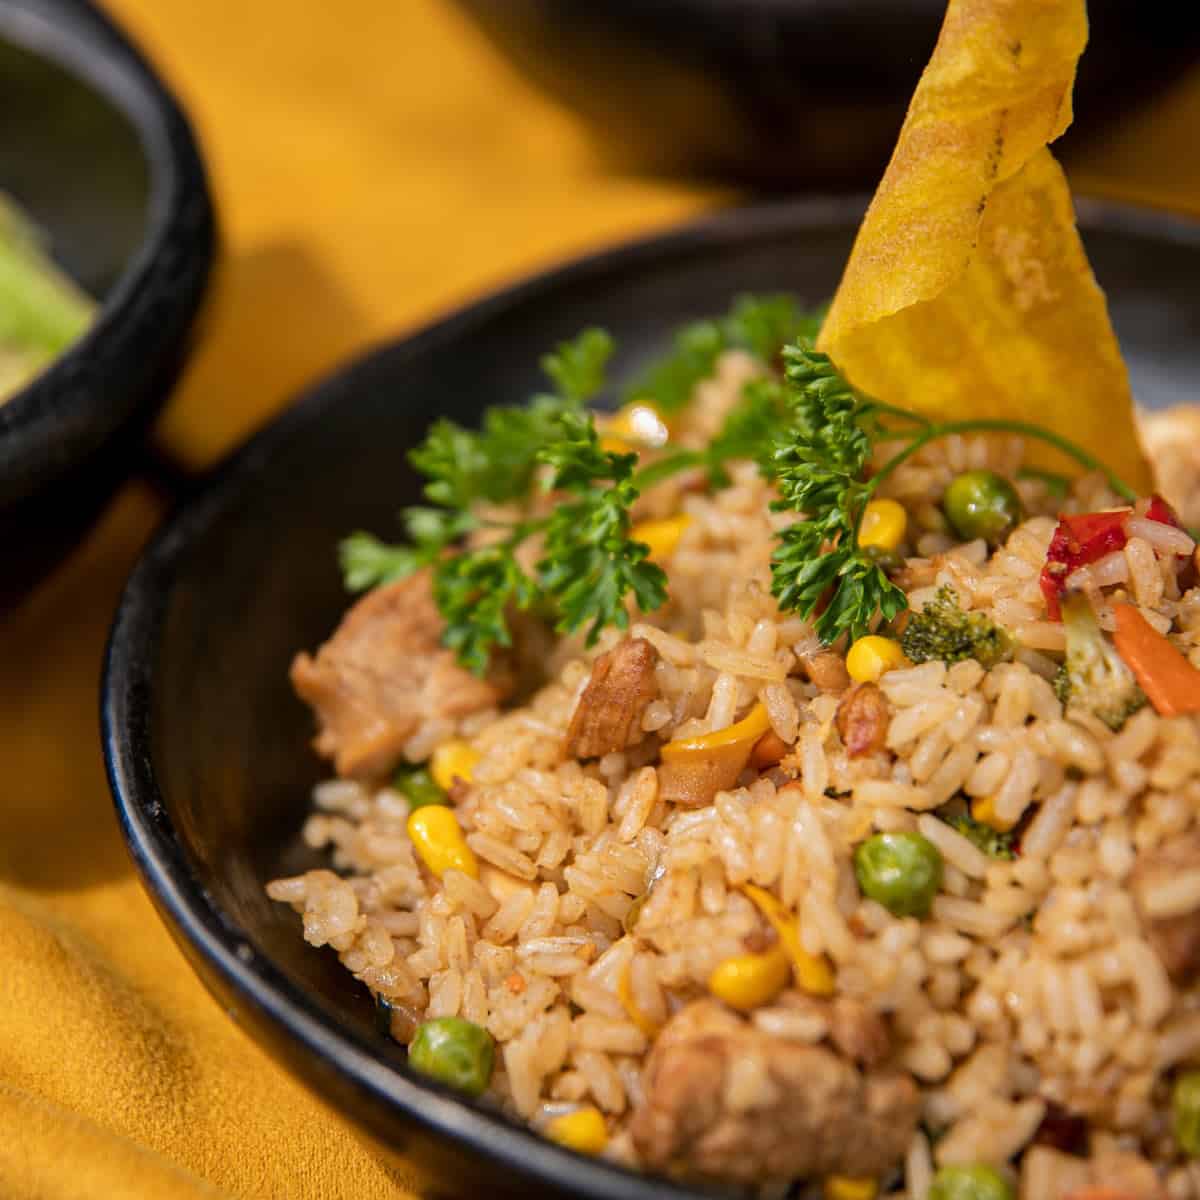 Pork fried rice with peas and corn in a black bowl.